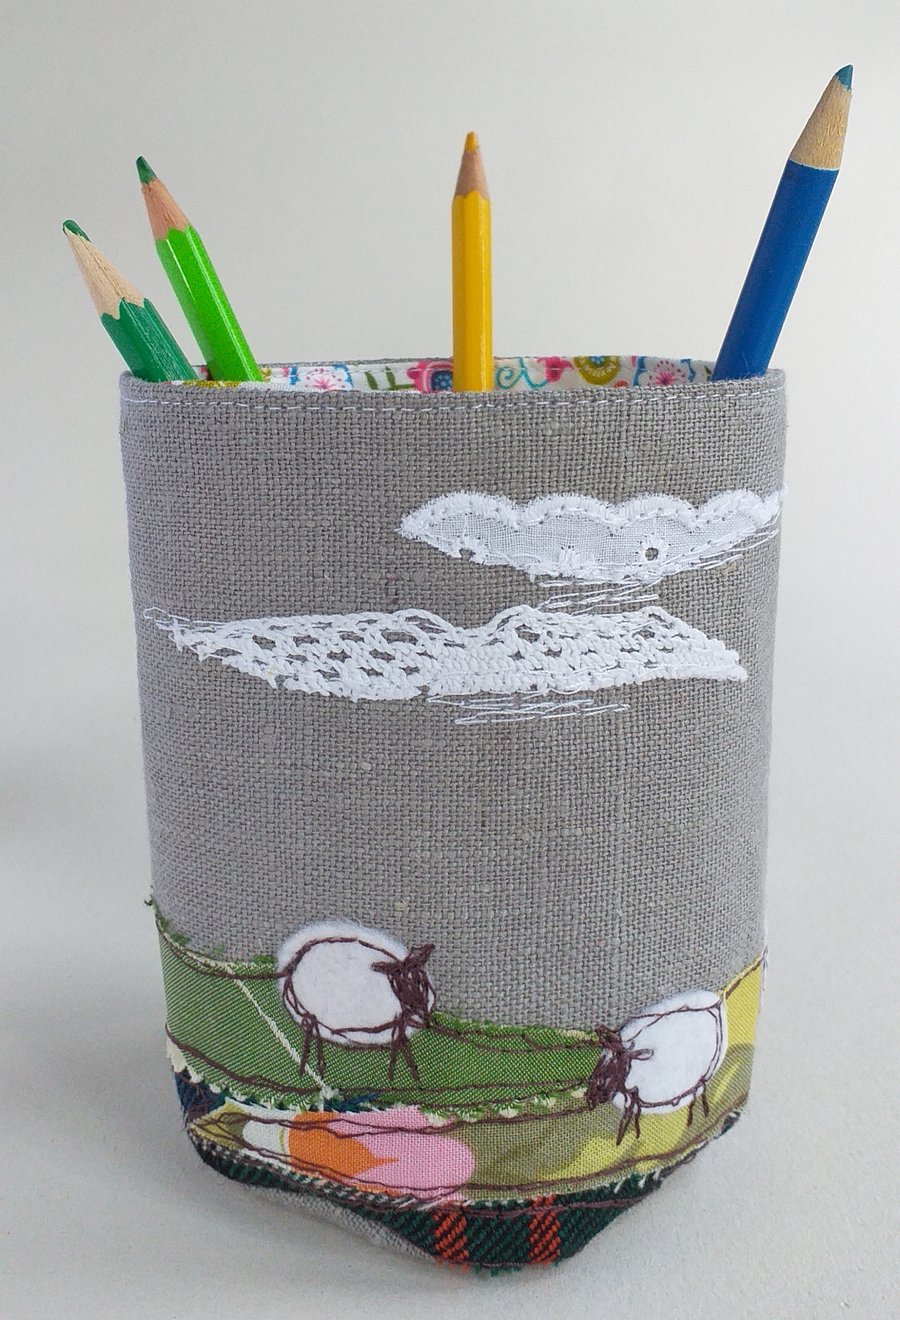 Fabric Pencil Pot with Embroidered Sheep in a Field